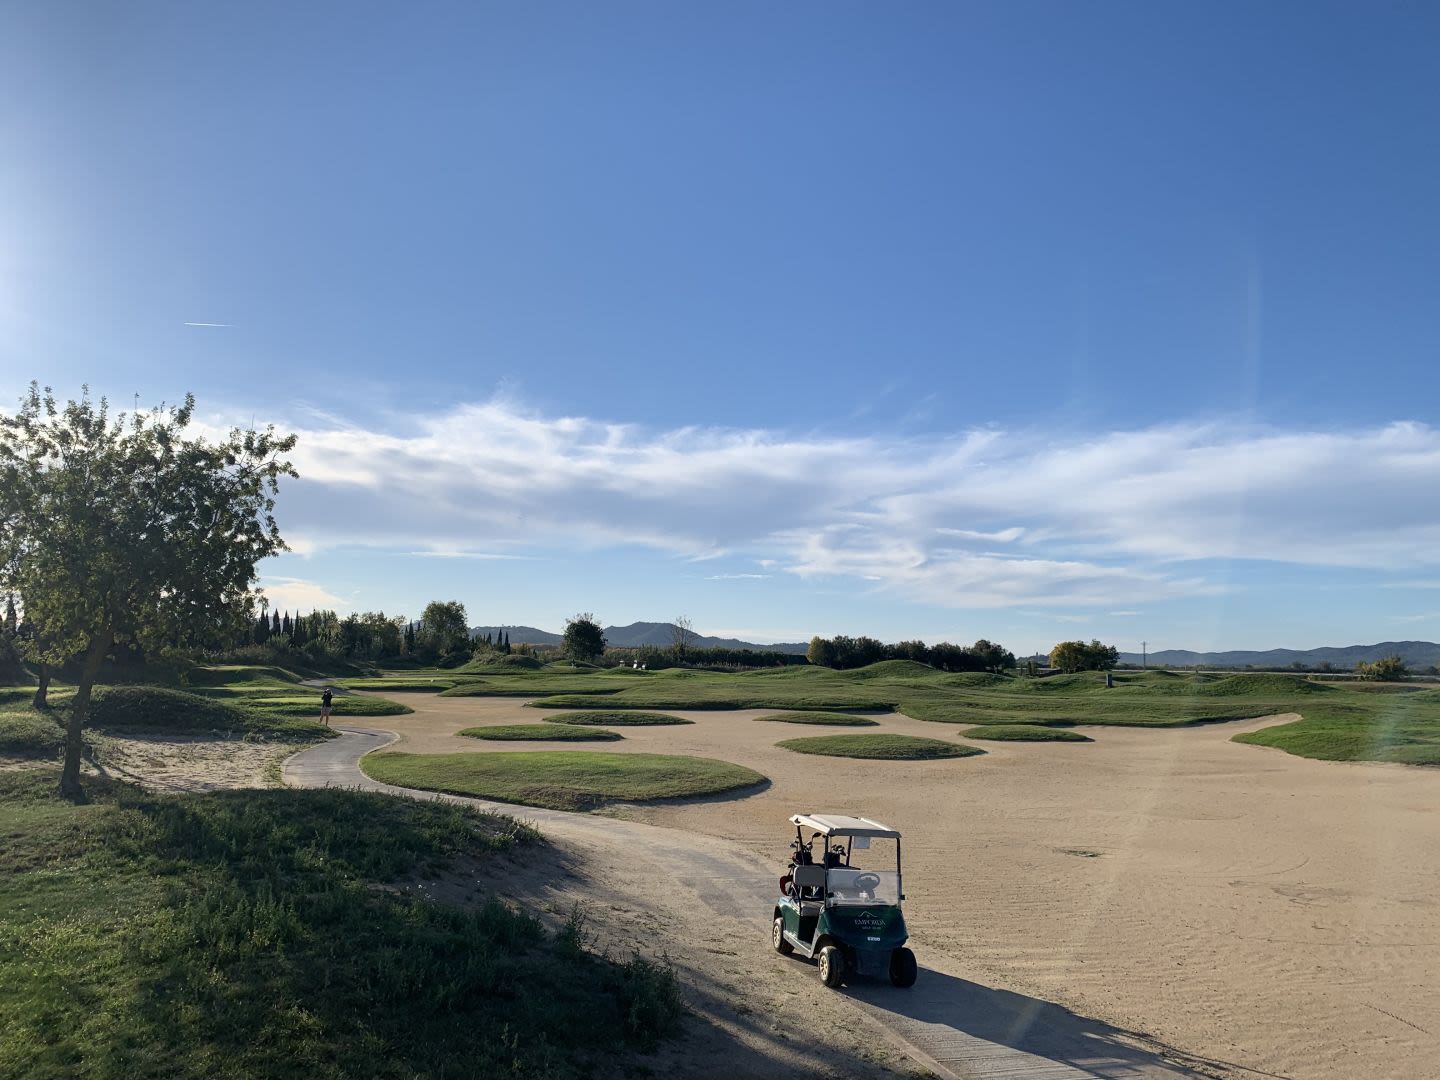 A view of Hole 6 Par 3, Hcp 15 of 159m at the Links Course of Empordà Golf.